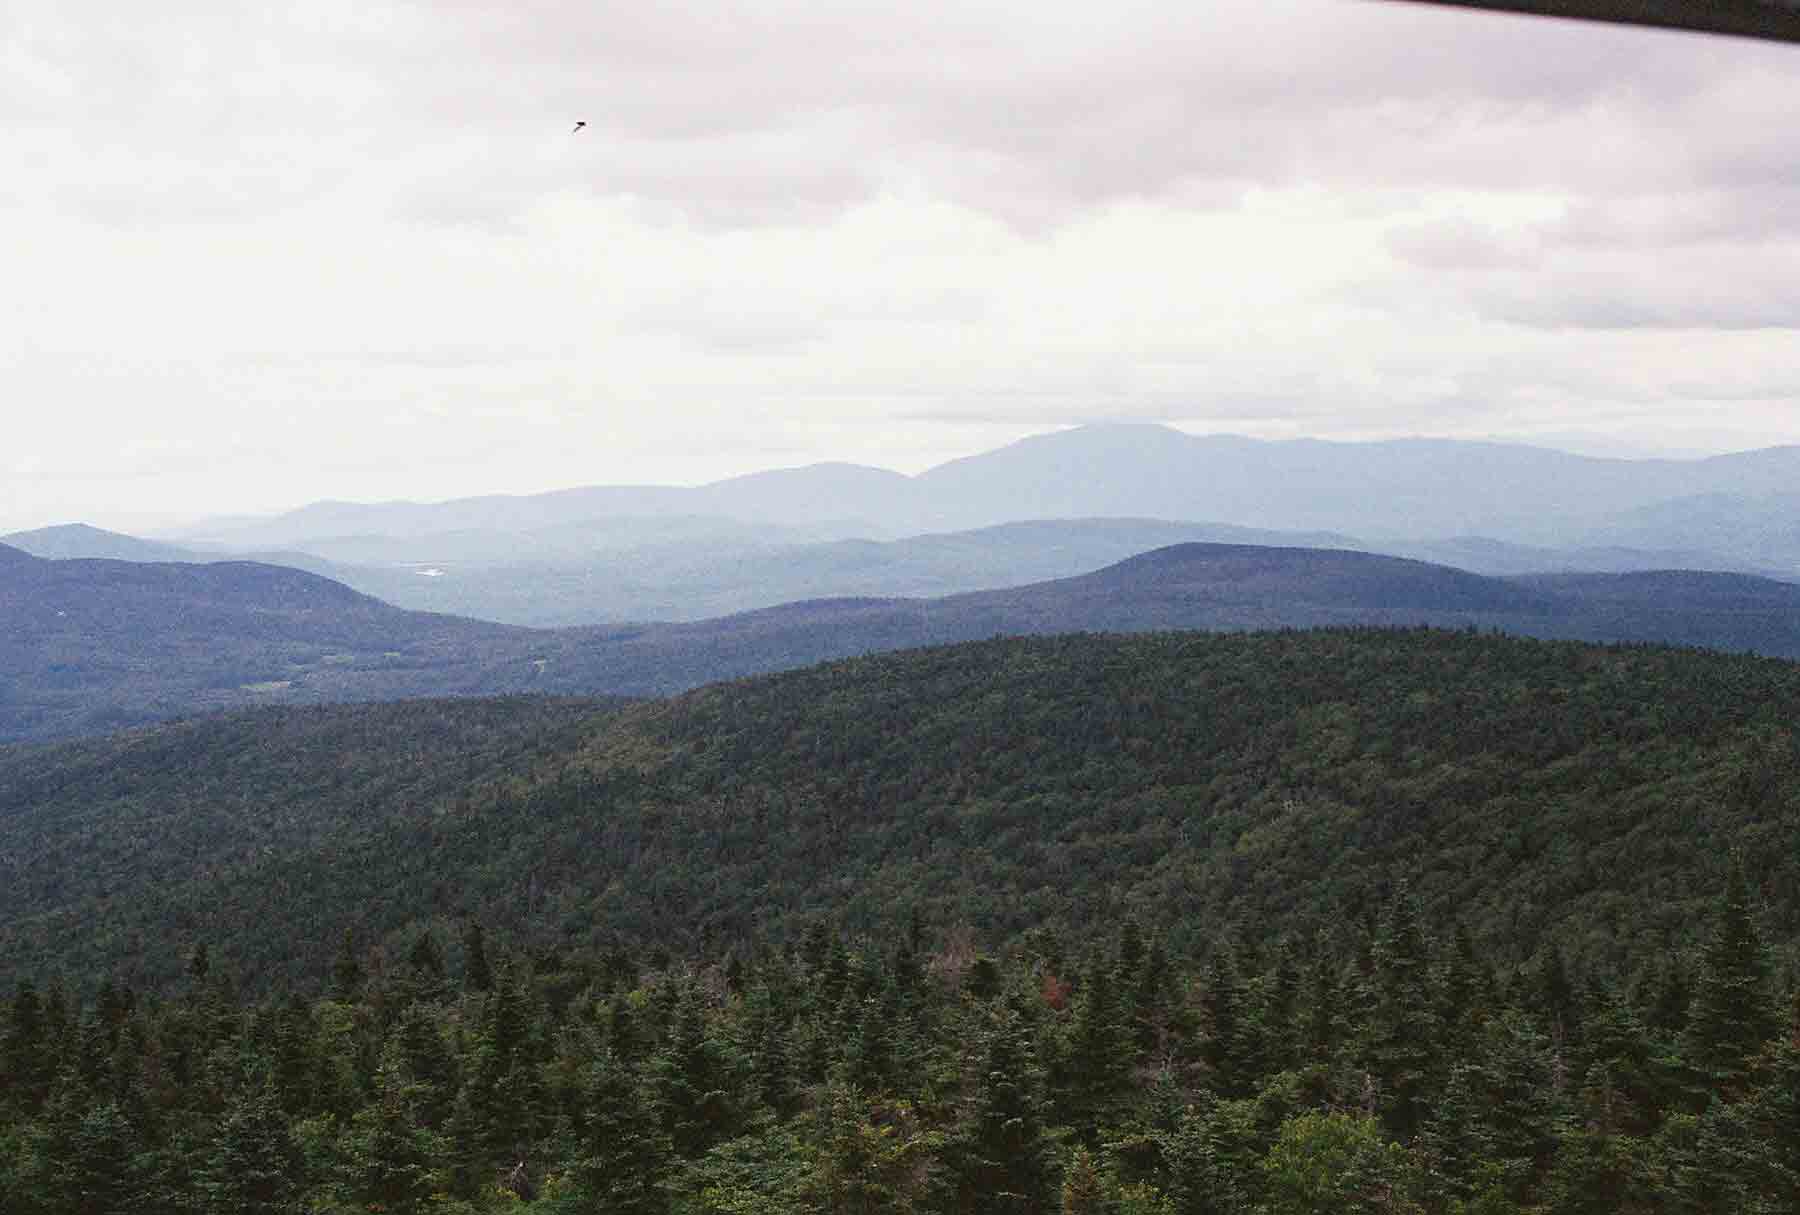 mm 10.2 View Northeast from Smart's Mt. Firetower. The large mountain in distance is Mt. Moosilauke which the AT climbs.  Courtesy dlcul@conncoll.edu